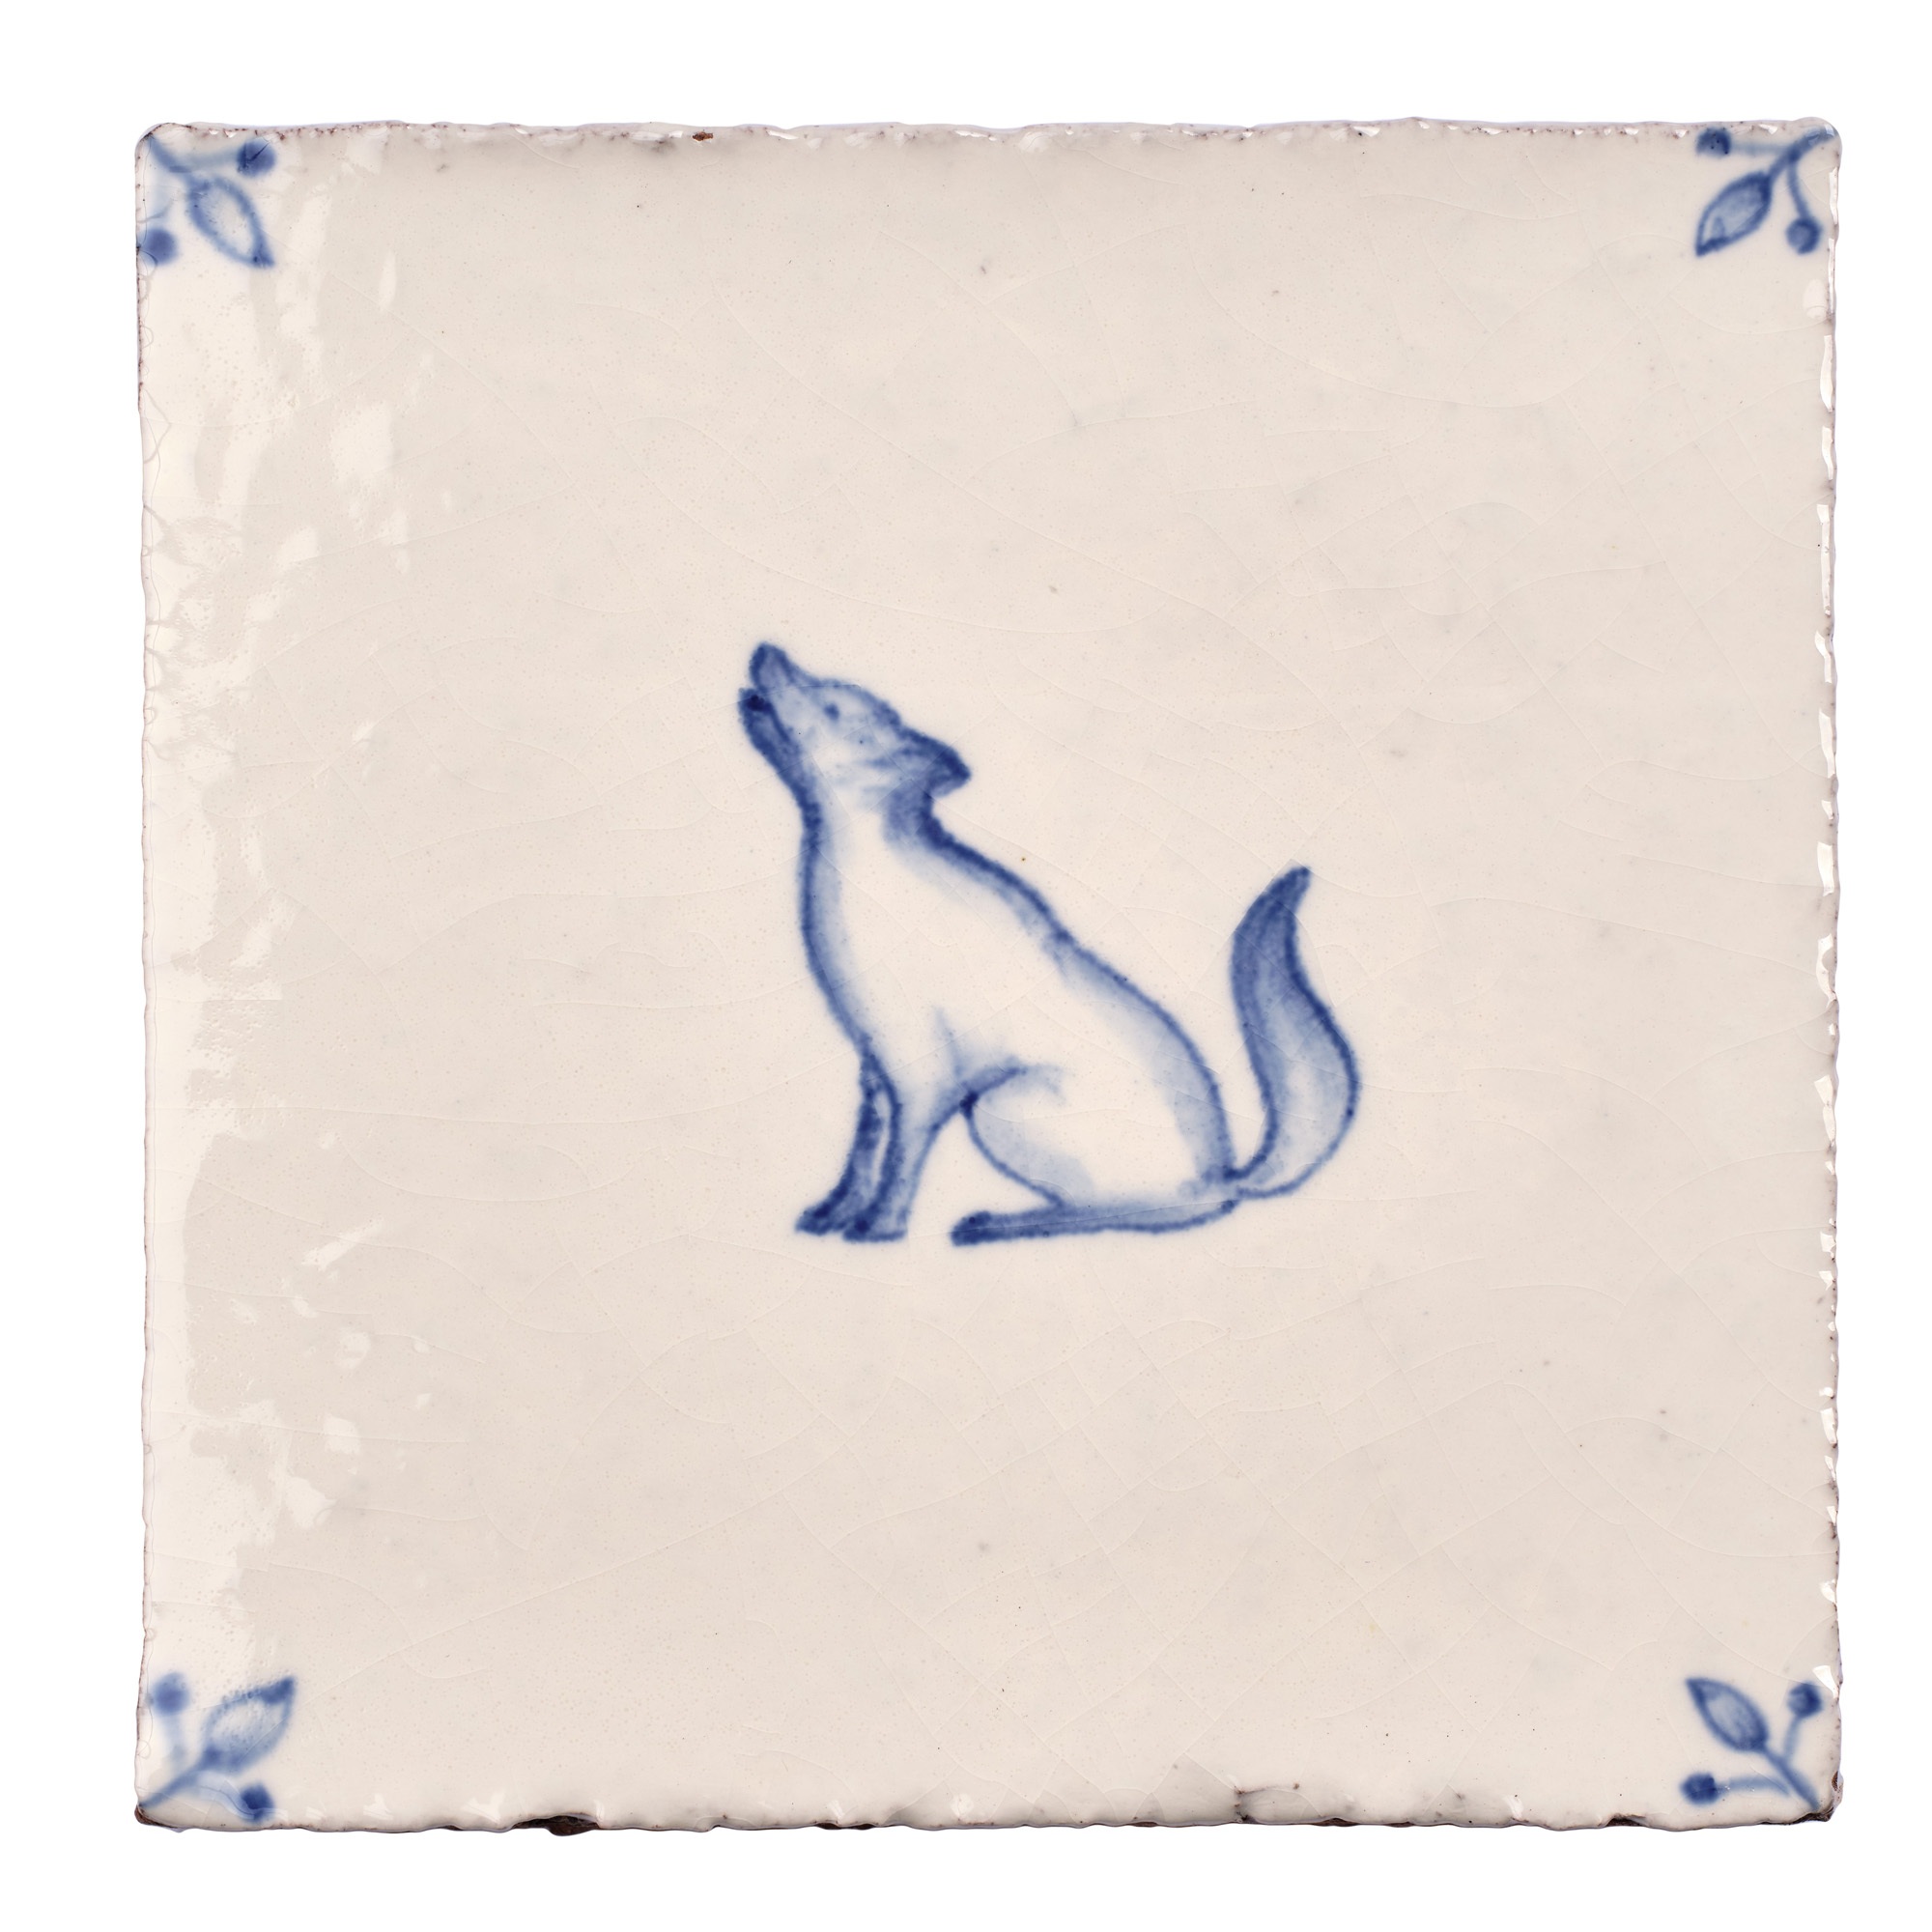 Wilding Wolf with Corner Motif Square, product variant image